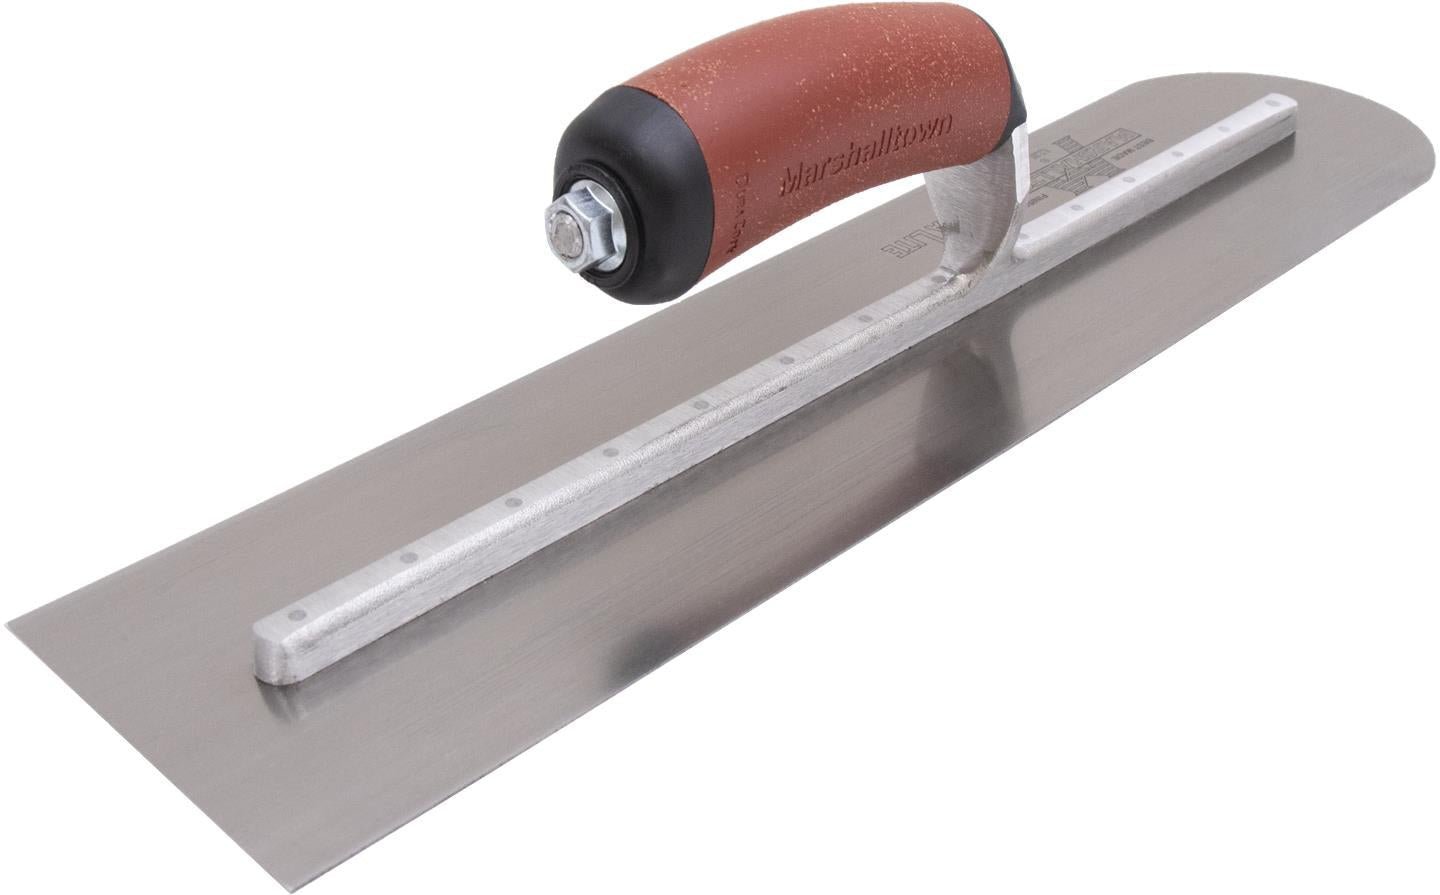 Marshalltown  MXS64REDC - 14 X 4 Rounded Front Finishing Trowel - DuraCork Handle